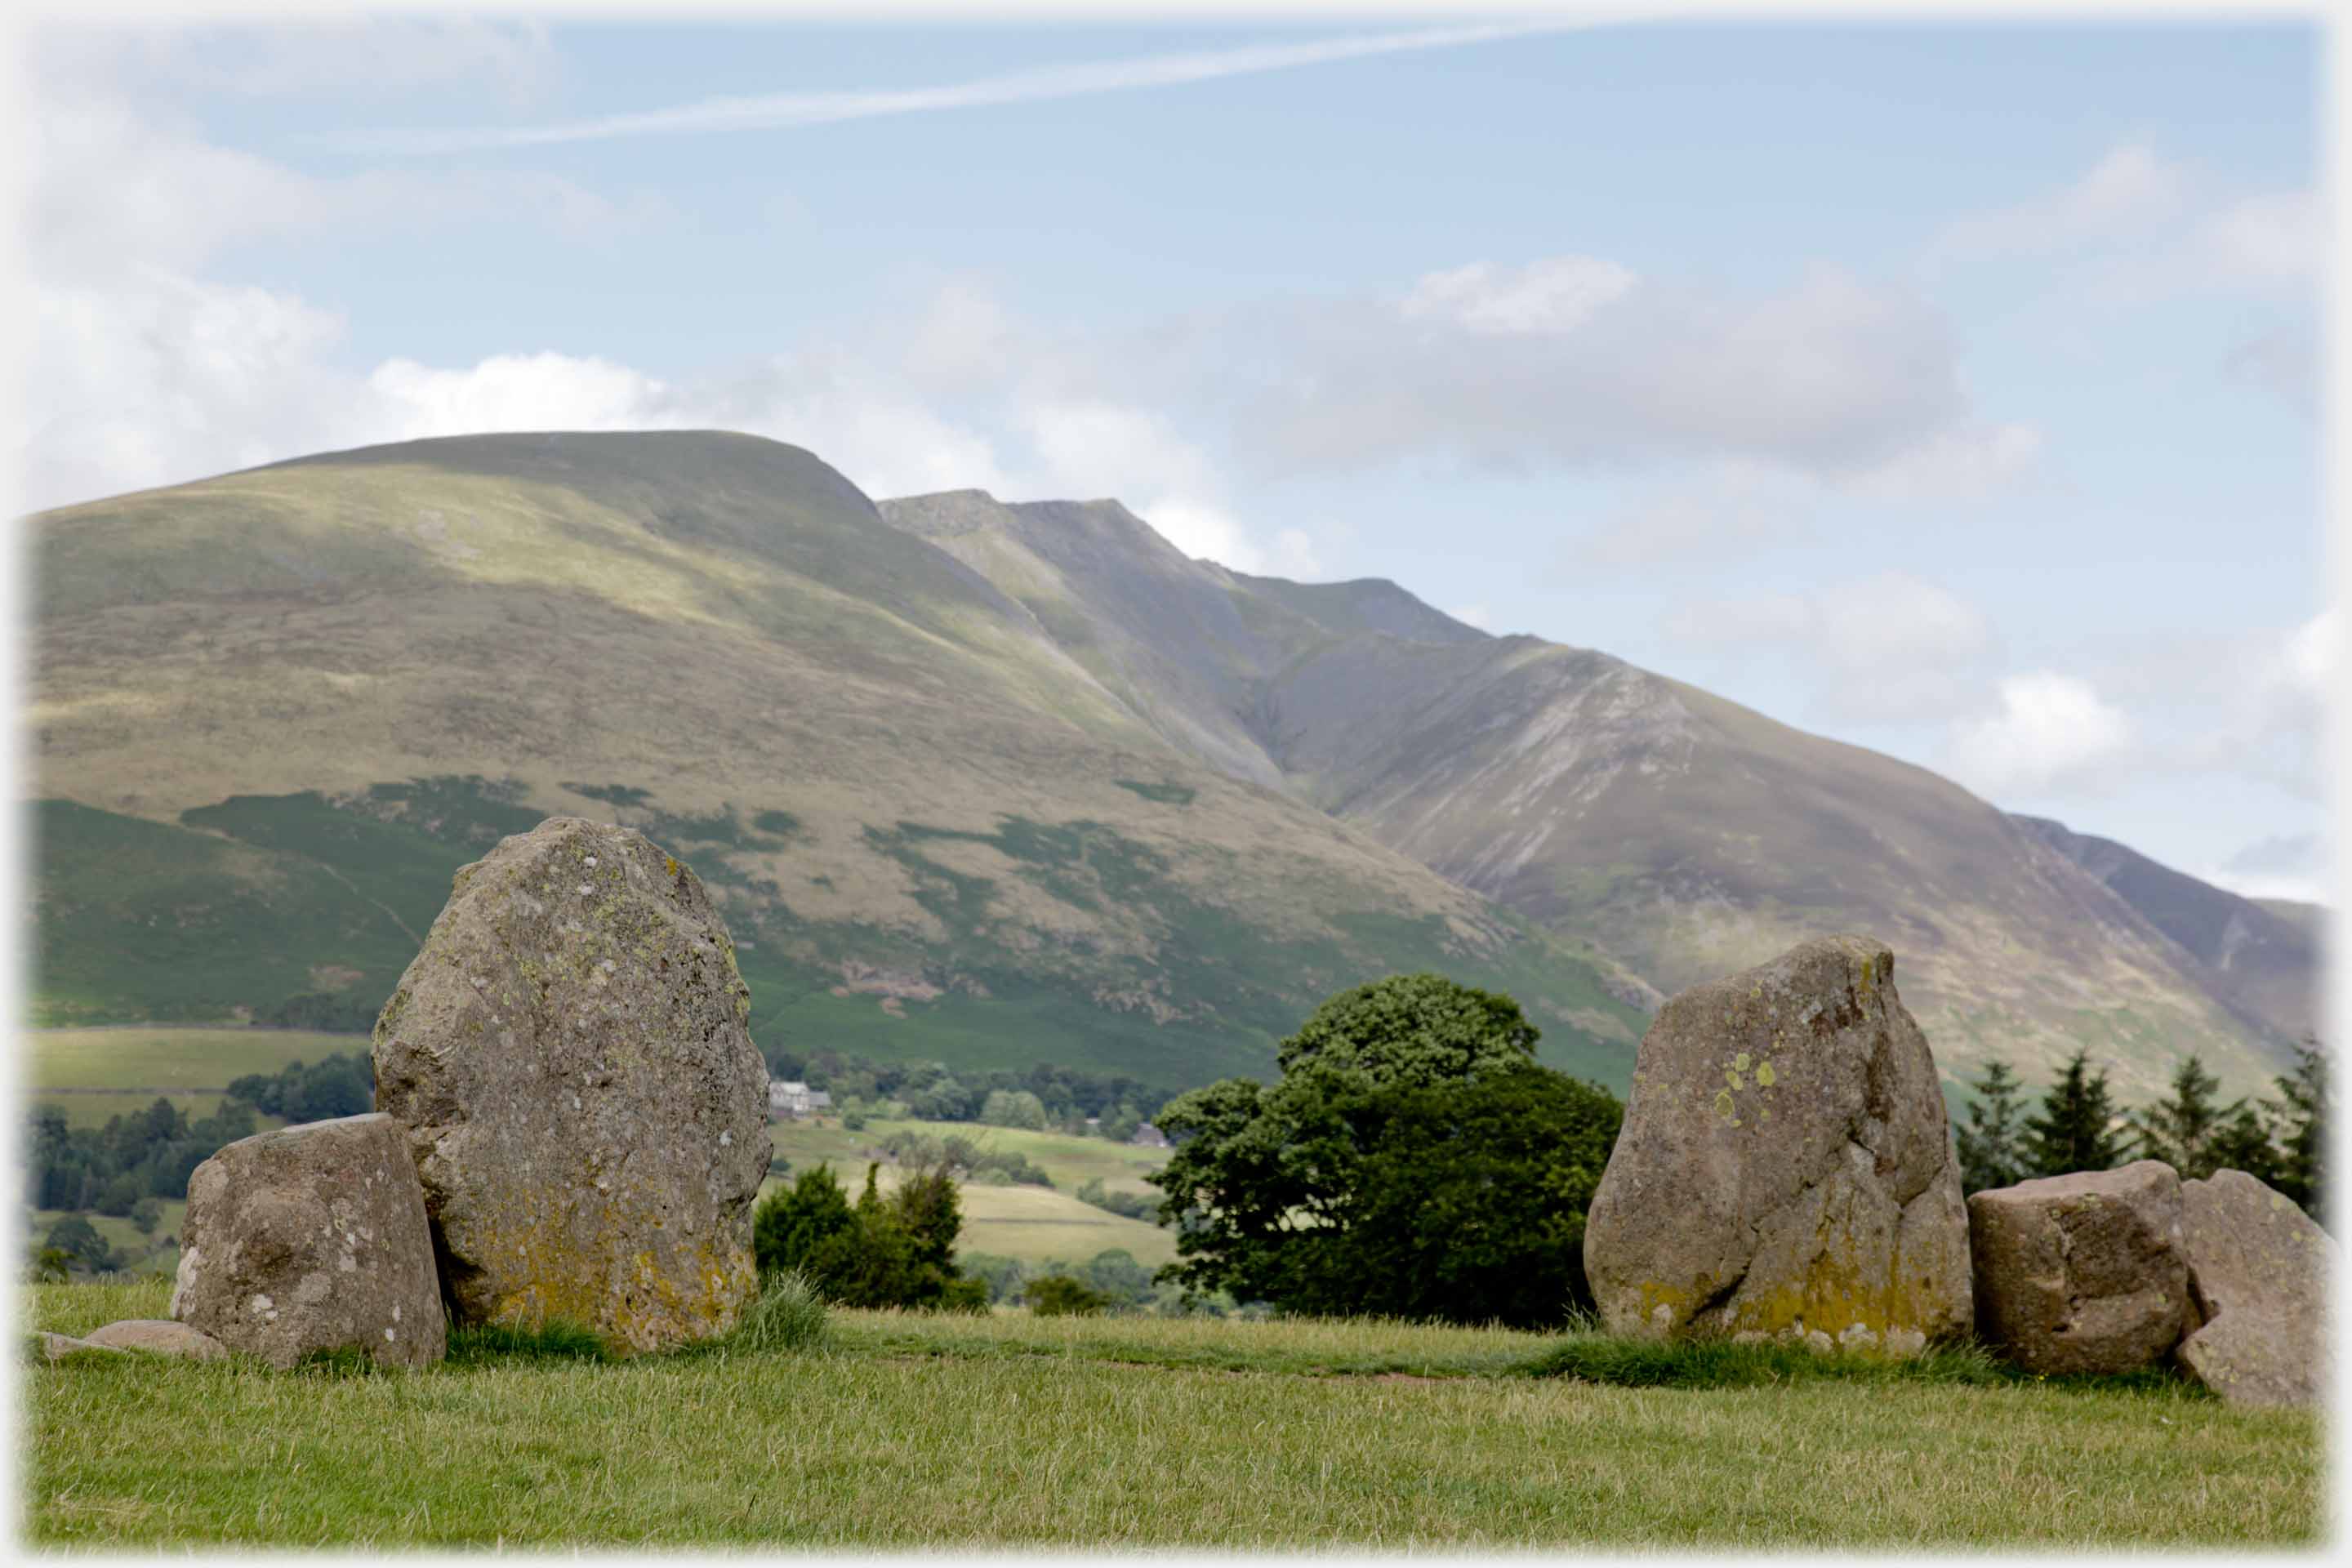 Repeat shot of the two big stones but from other side showing them framing the mountain.